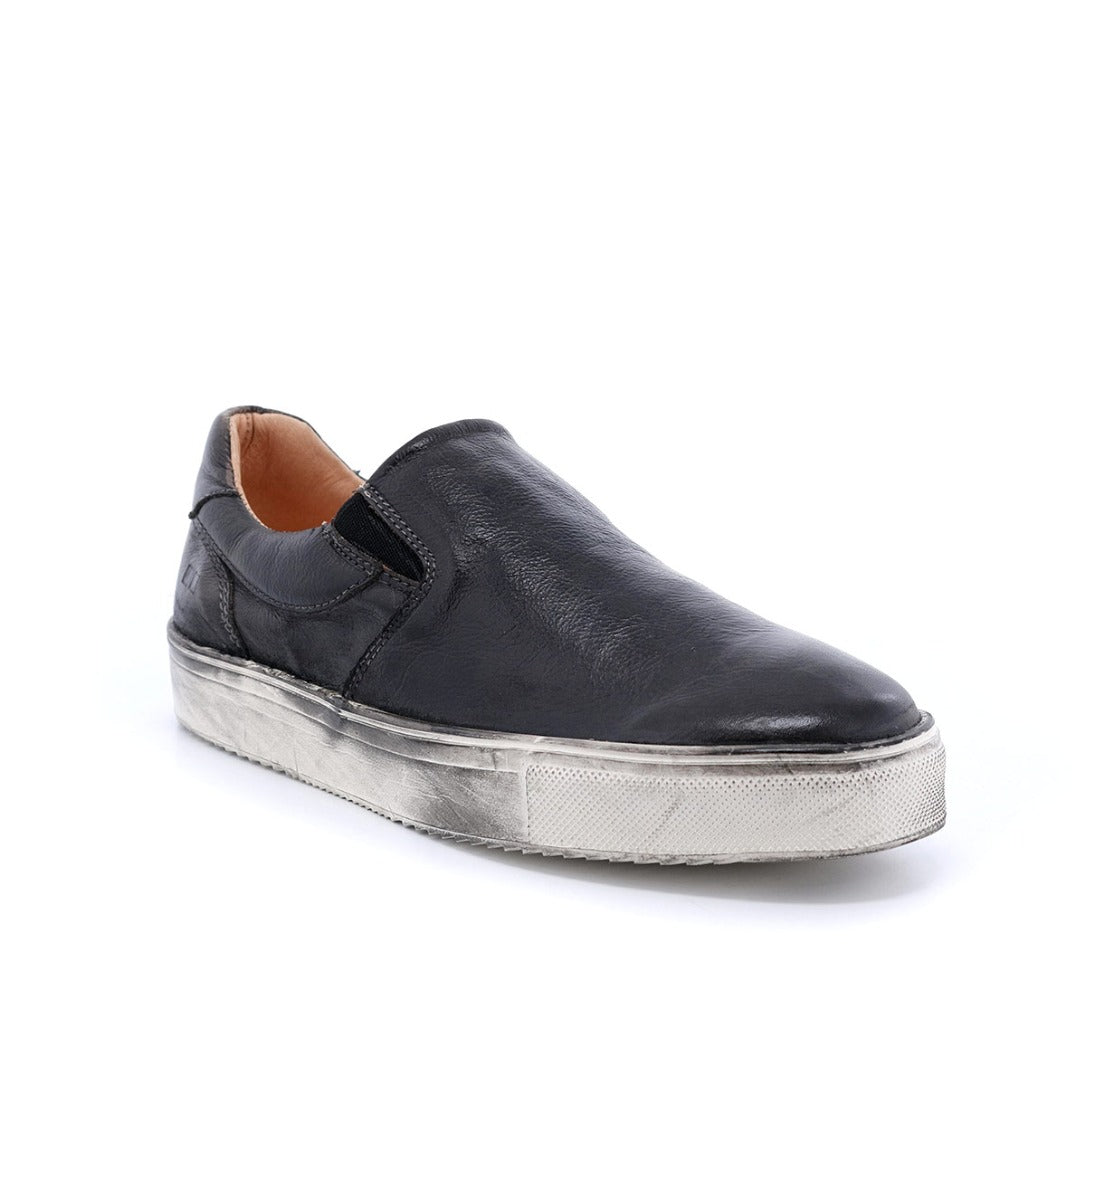 A black leather slip on sneaker with silver soles, called Hermione by Bed Stu.